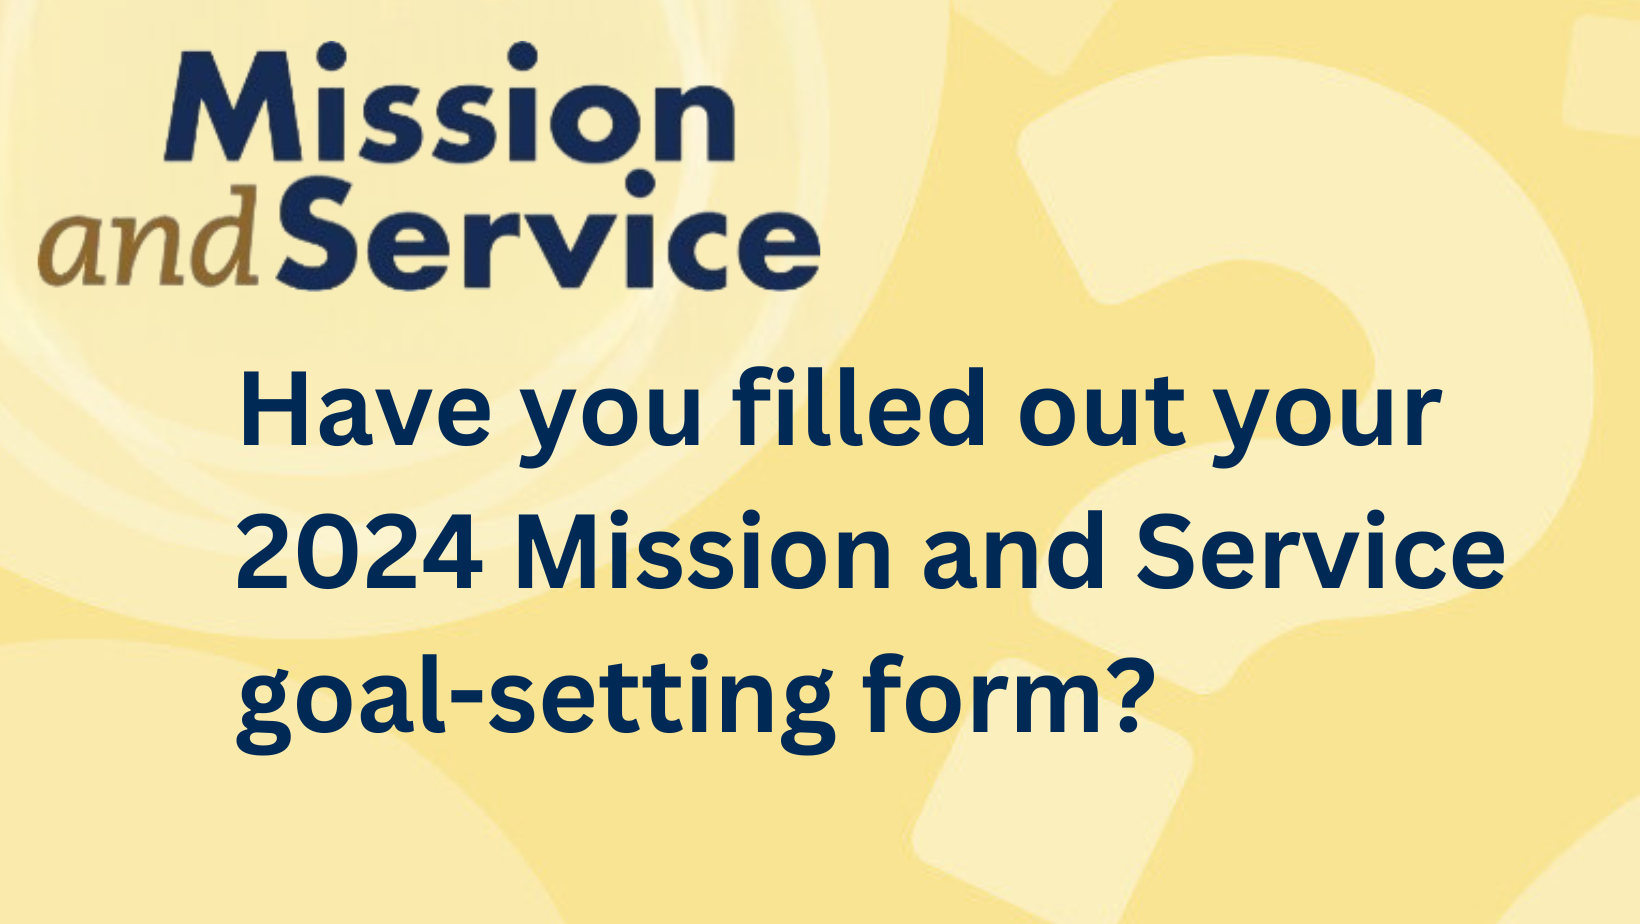 Mission and Service: Have you filled out your 2024 Mission and Service goal-setting form?